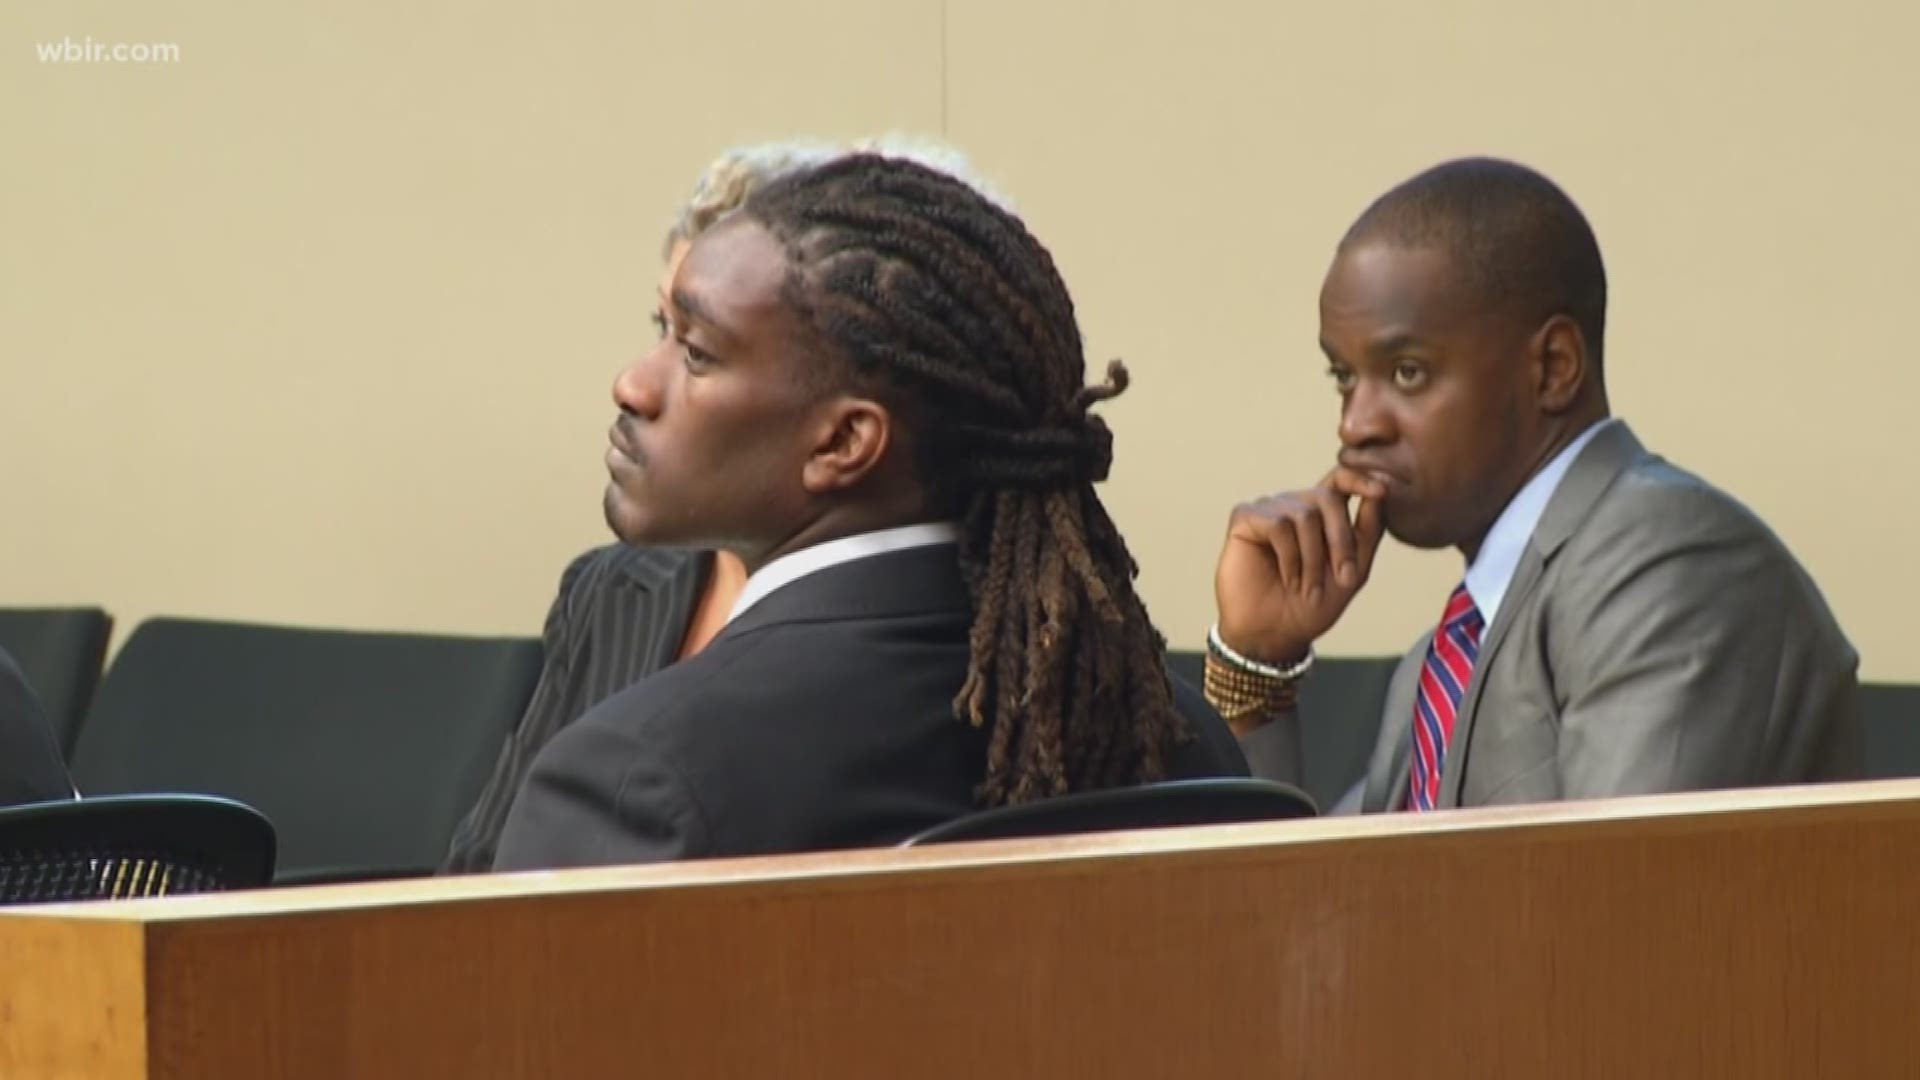 The jury foreman in the rape trial of two former Vols players says there wasn't enough evidence to convict.